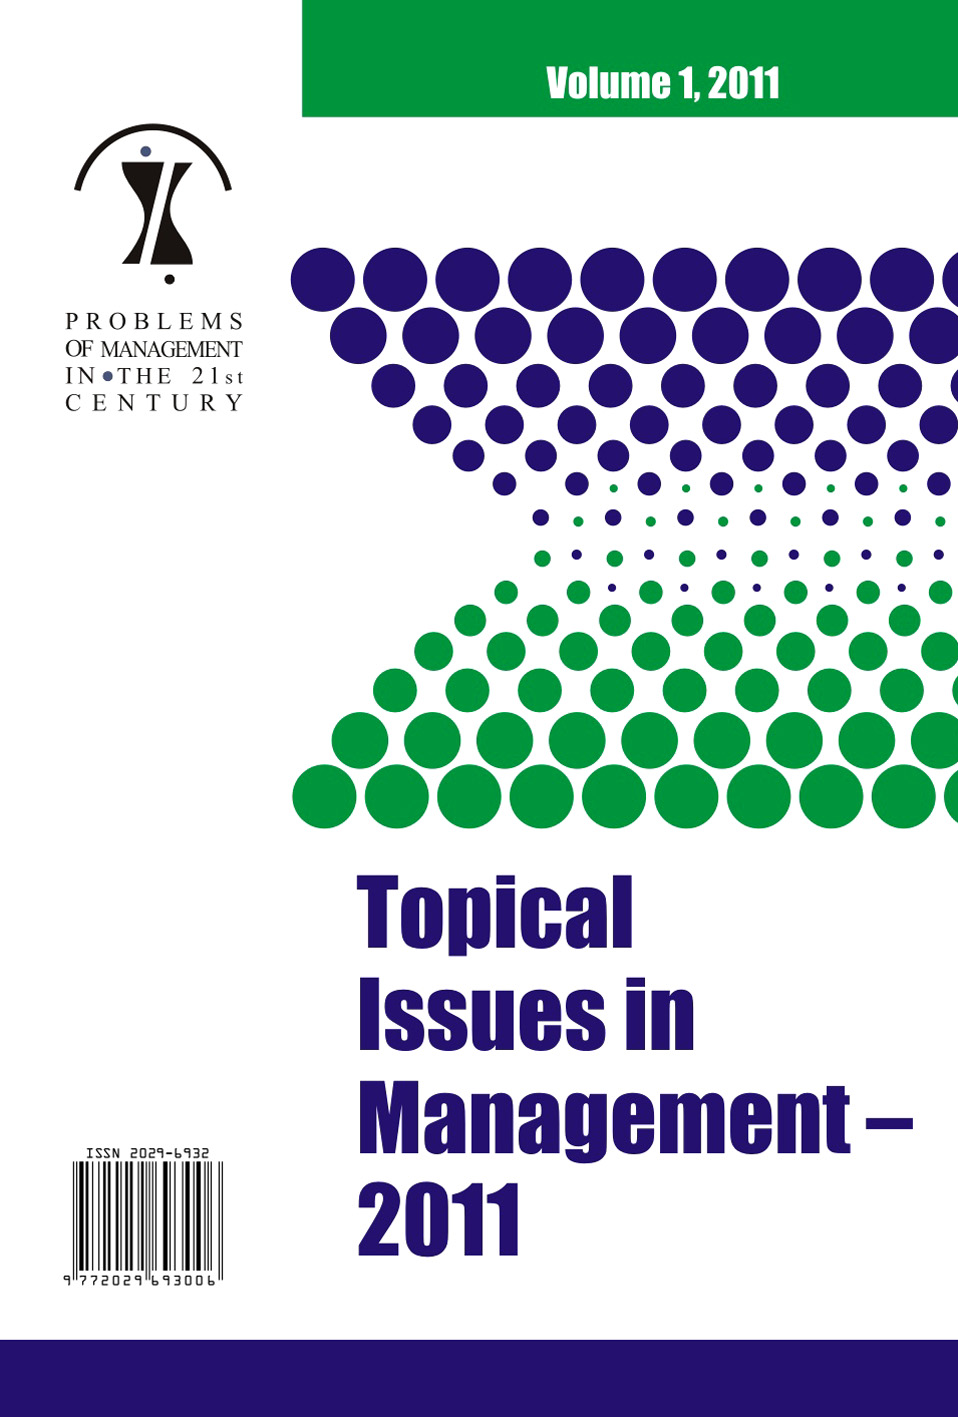 APPRAISING THE IMPACT OF ORGANIZATIONAL COMMUNICATION ON WORKER SATISFACTION IN ORGANIZATIONAL WORKPLACE